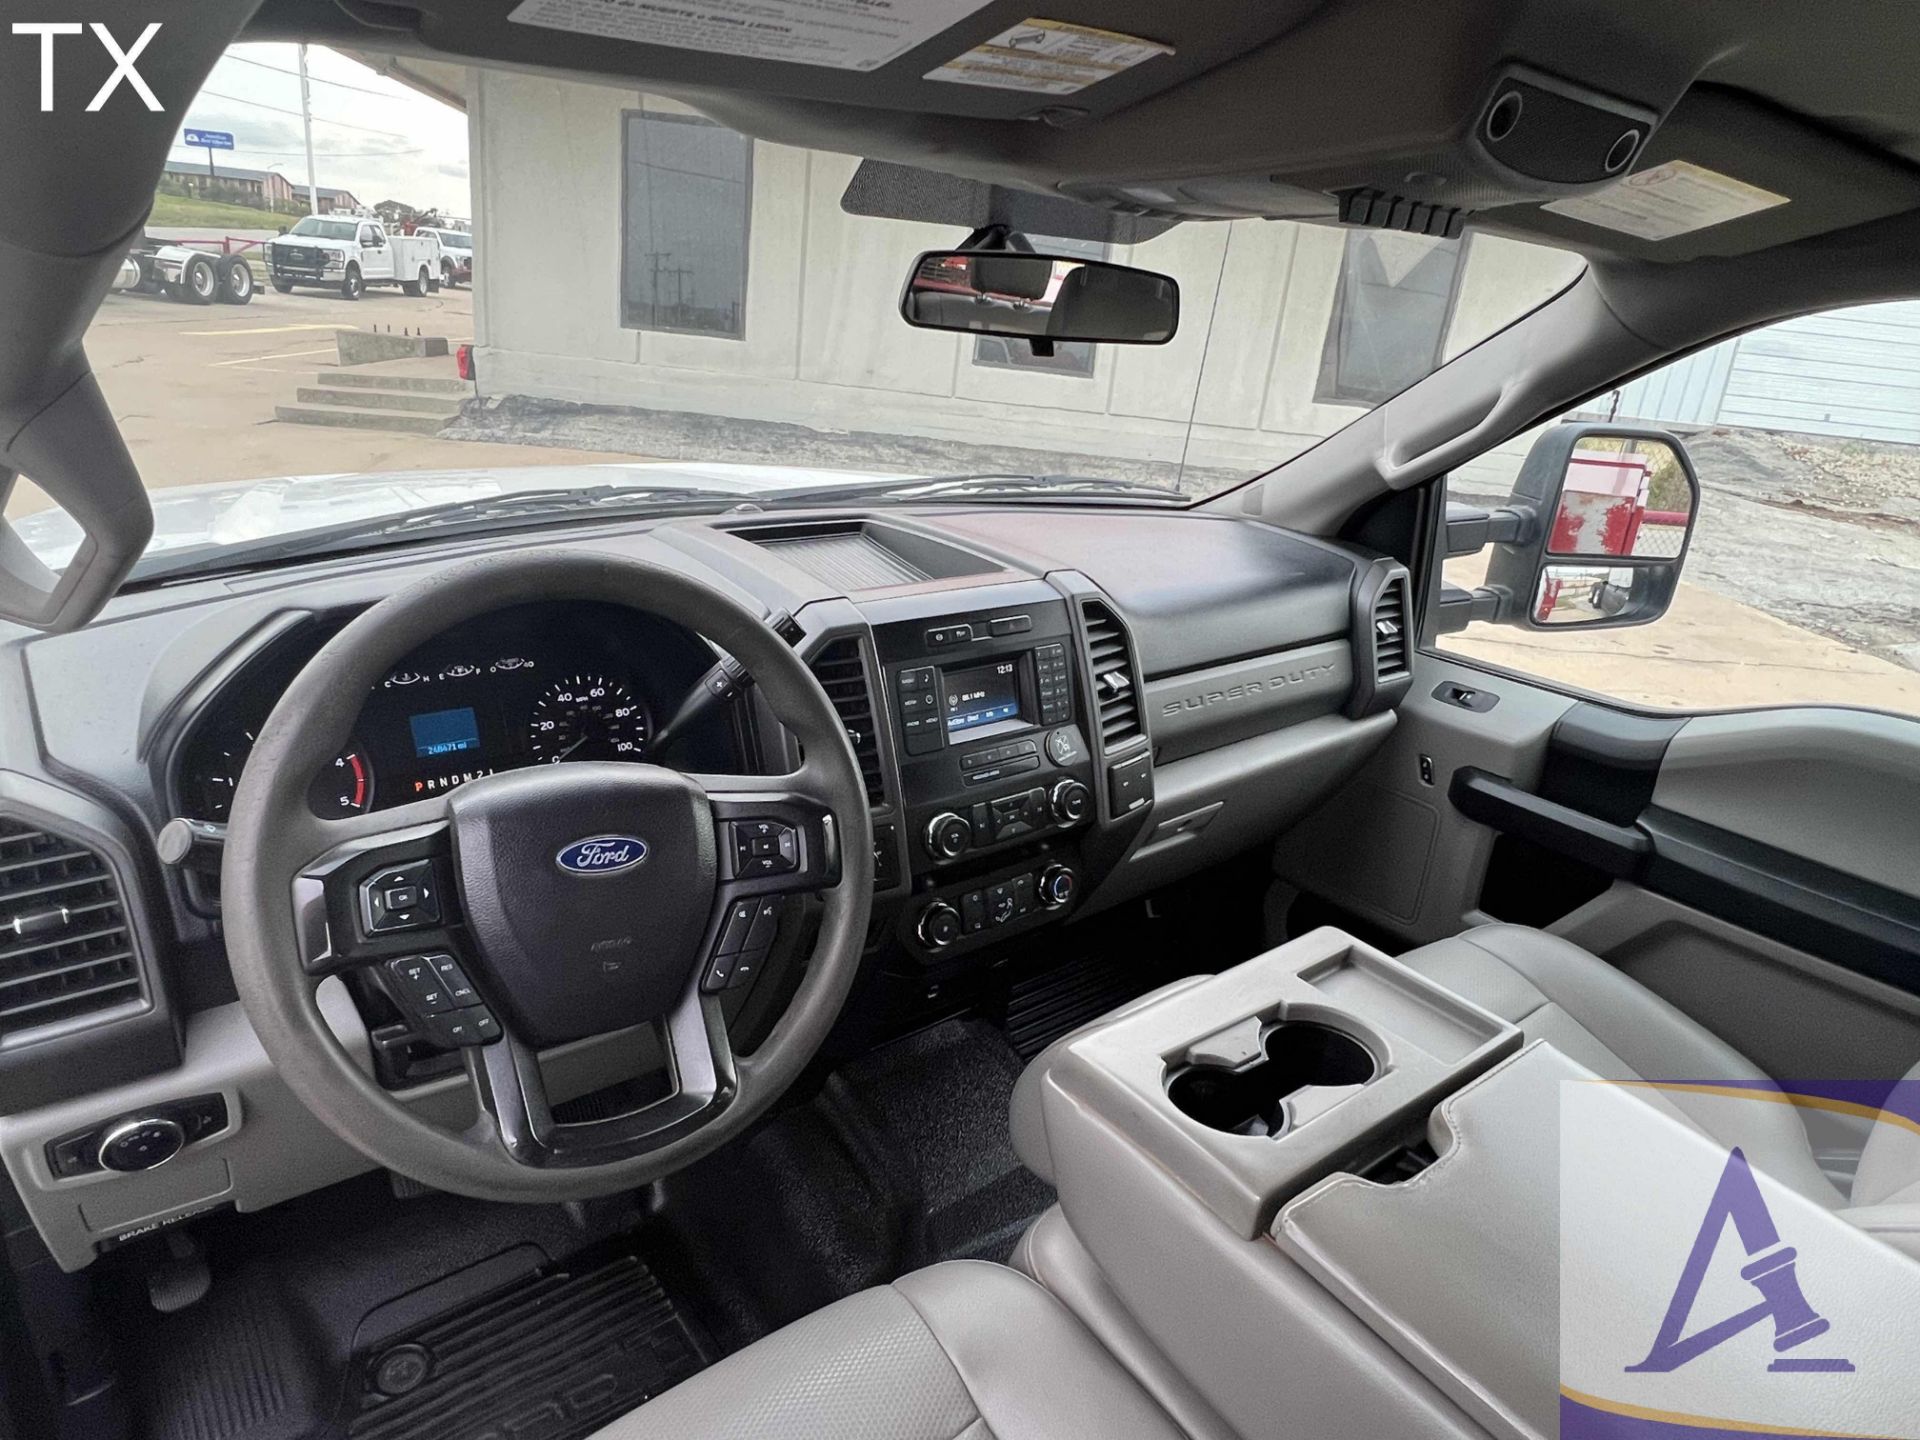 2019 Ford F550 4x4 Crew Cab Fuel Truck, Ingersoll-Rand Air Compressor, Toolboxes! - Image 13 of 20